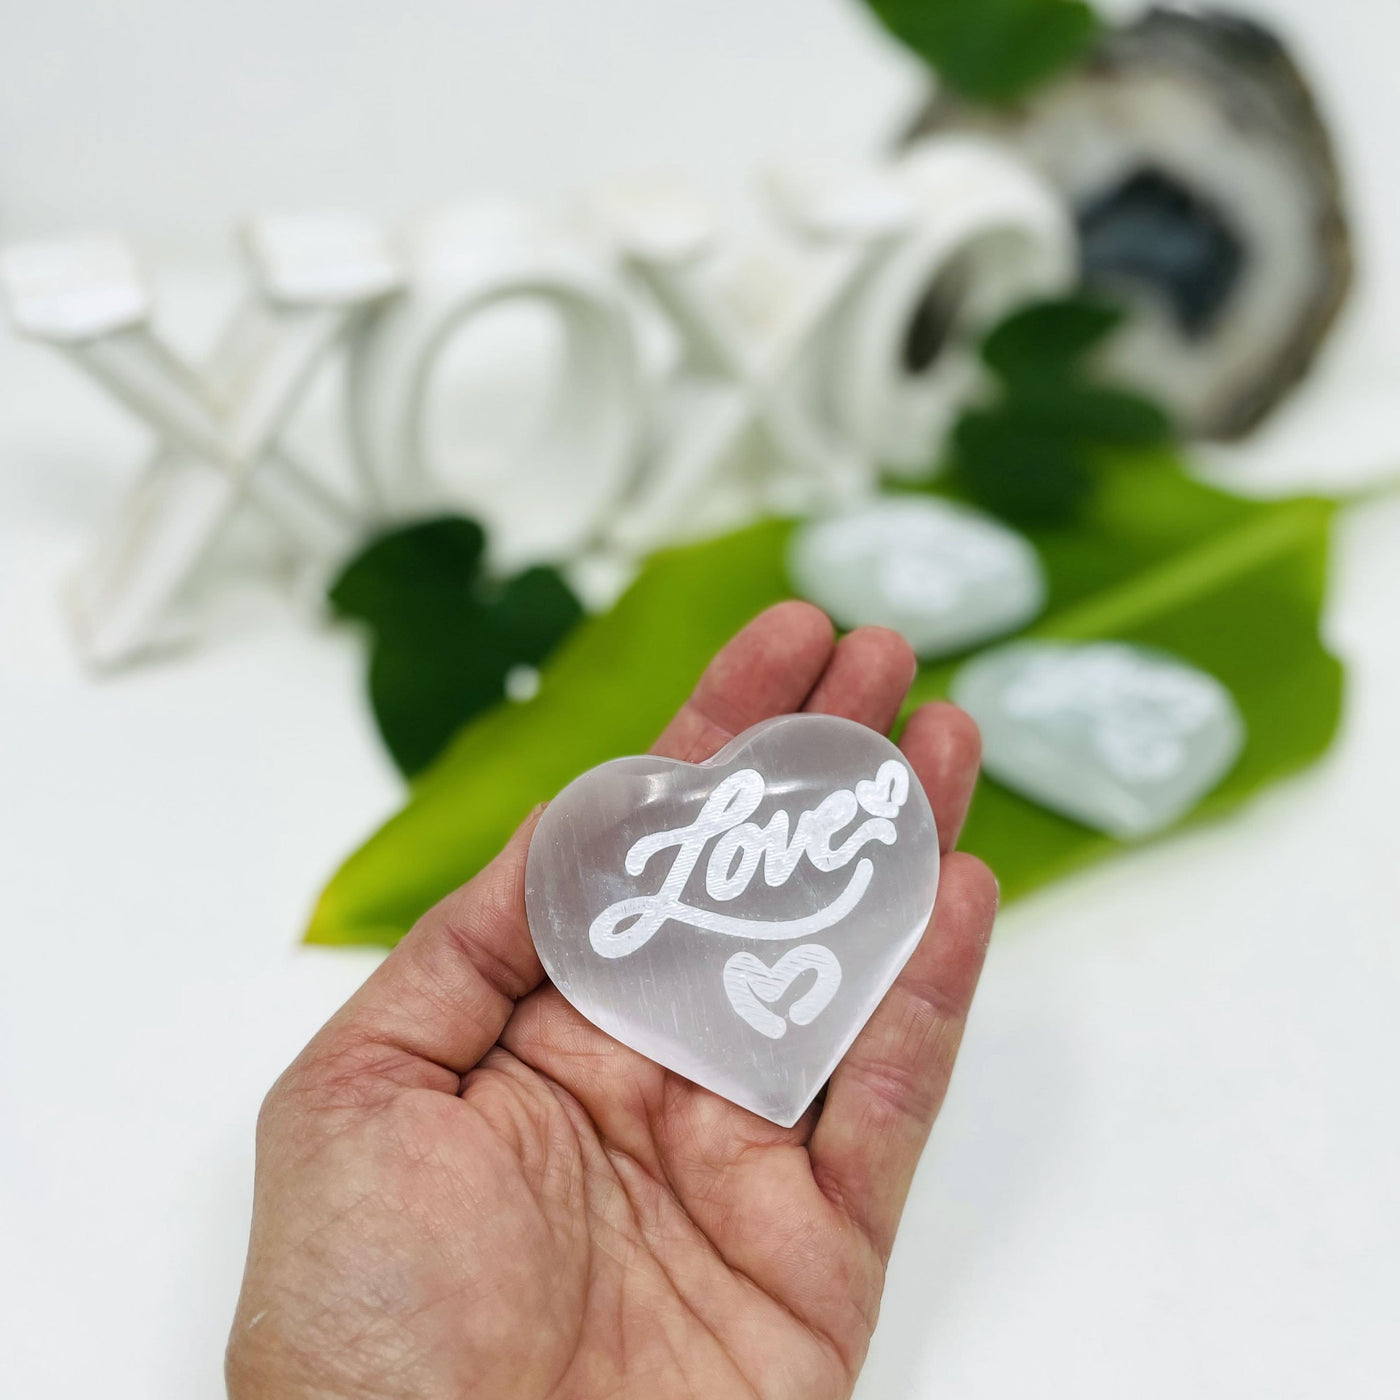 selenite engraved "love" heart stone in hand for size reference